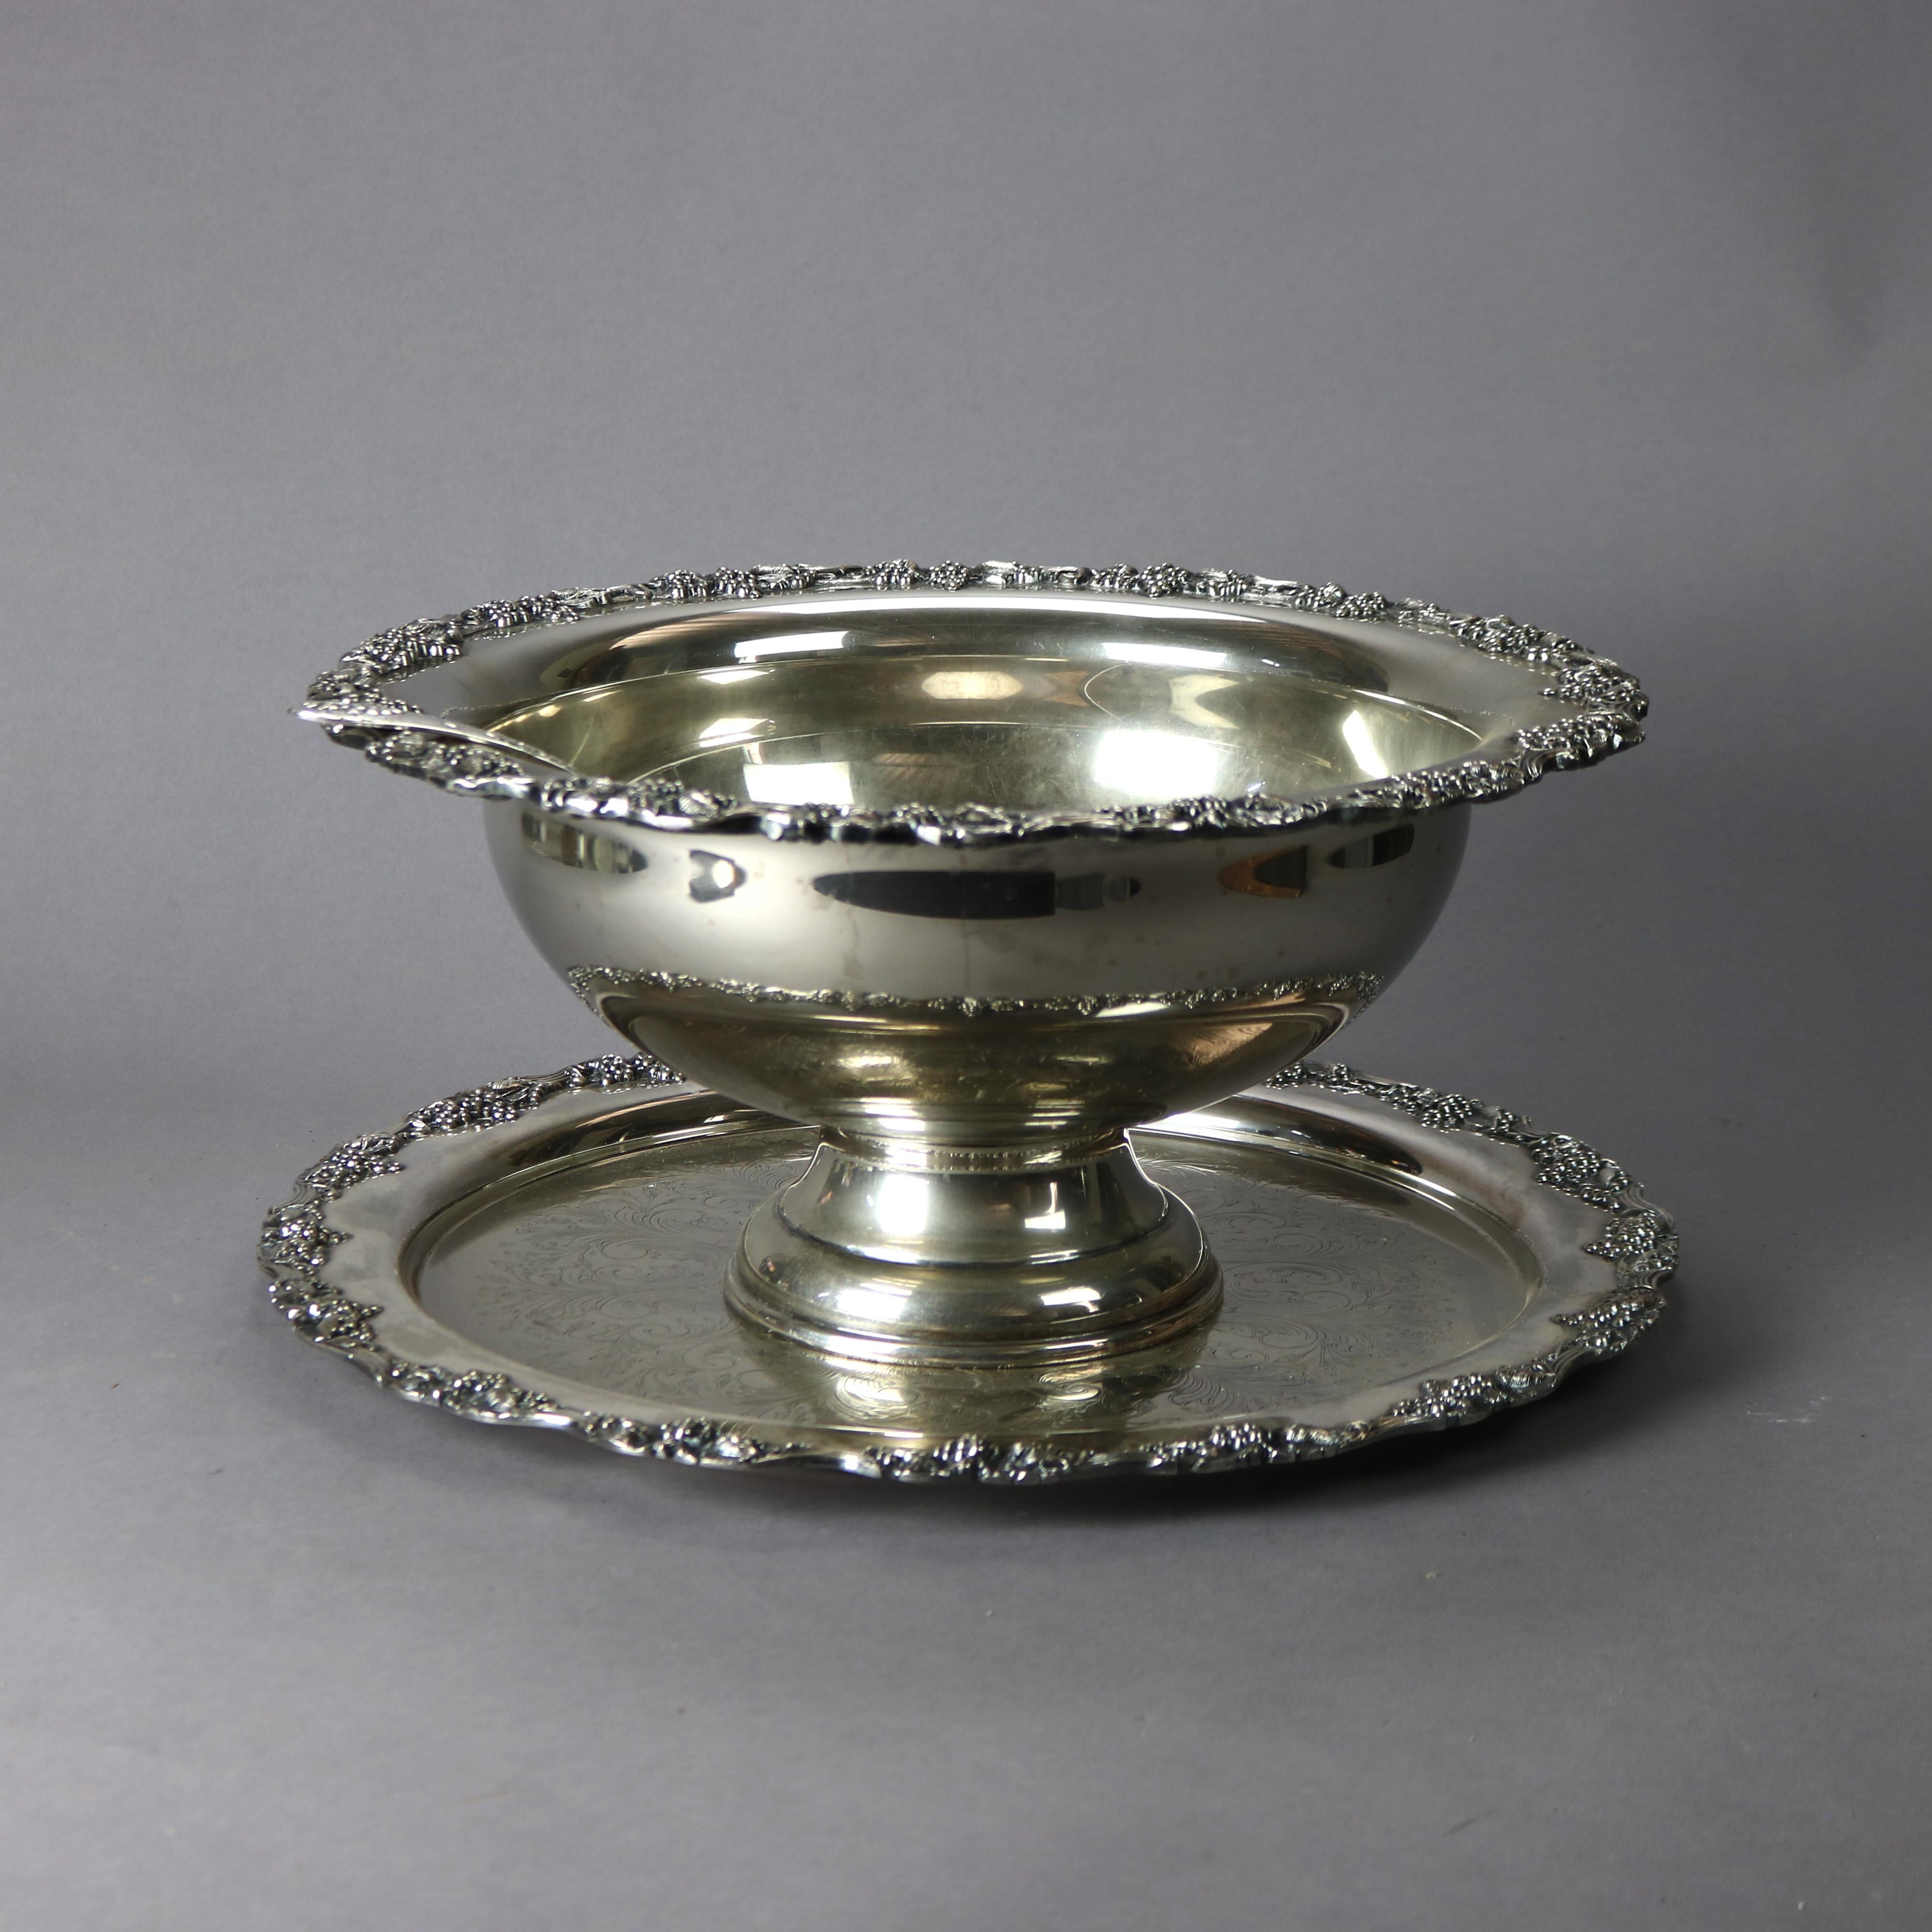 An antique silver plate punch bowl with ladle and tray liner by Sheriden Taunton Silversmiths offers silver plate construction with scroll and foliate decoration, 20th C

Measures - 8.75